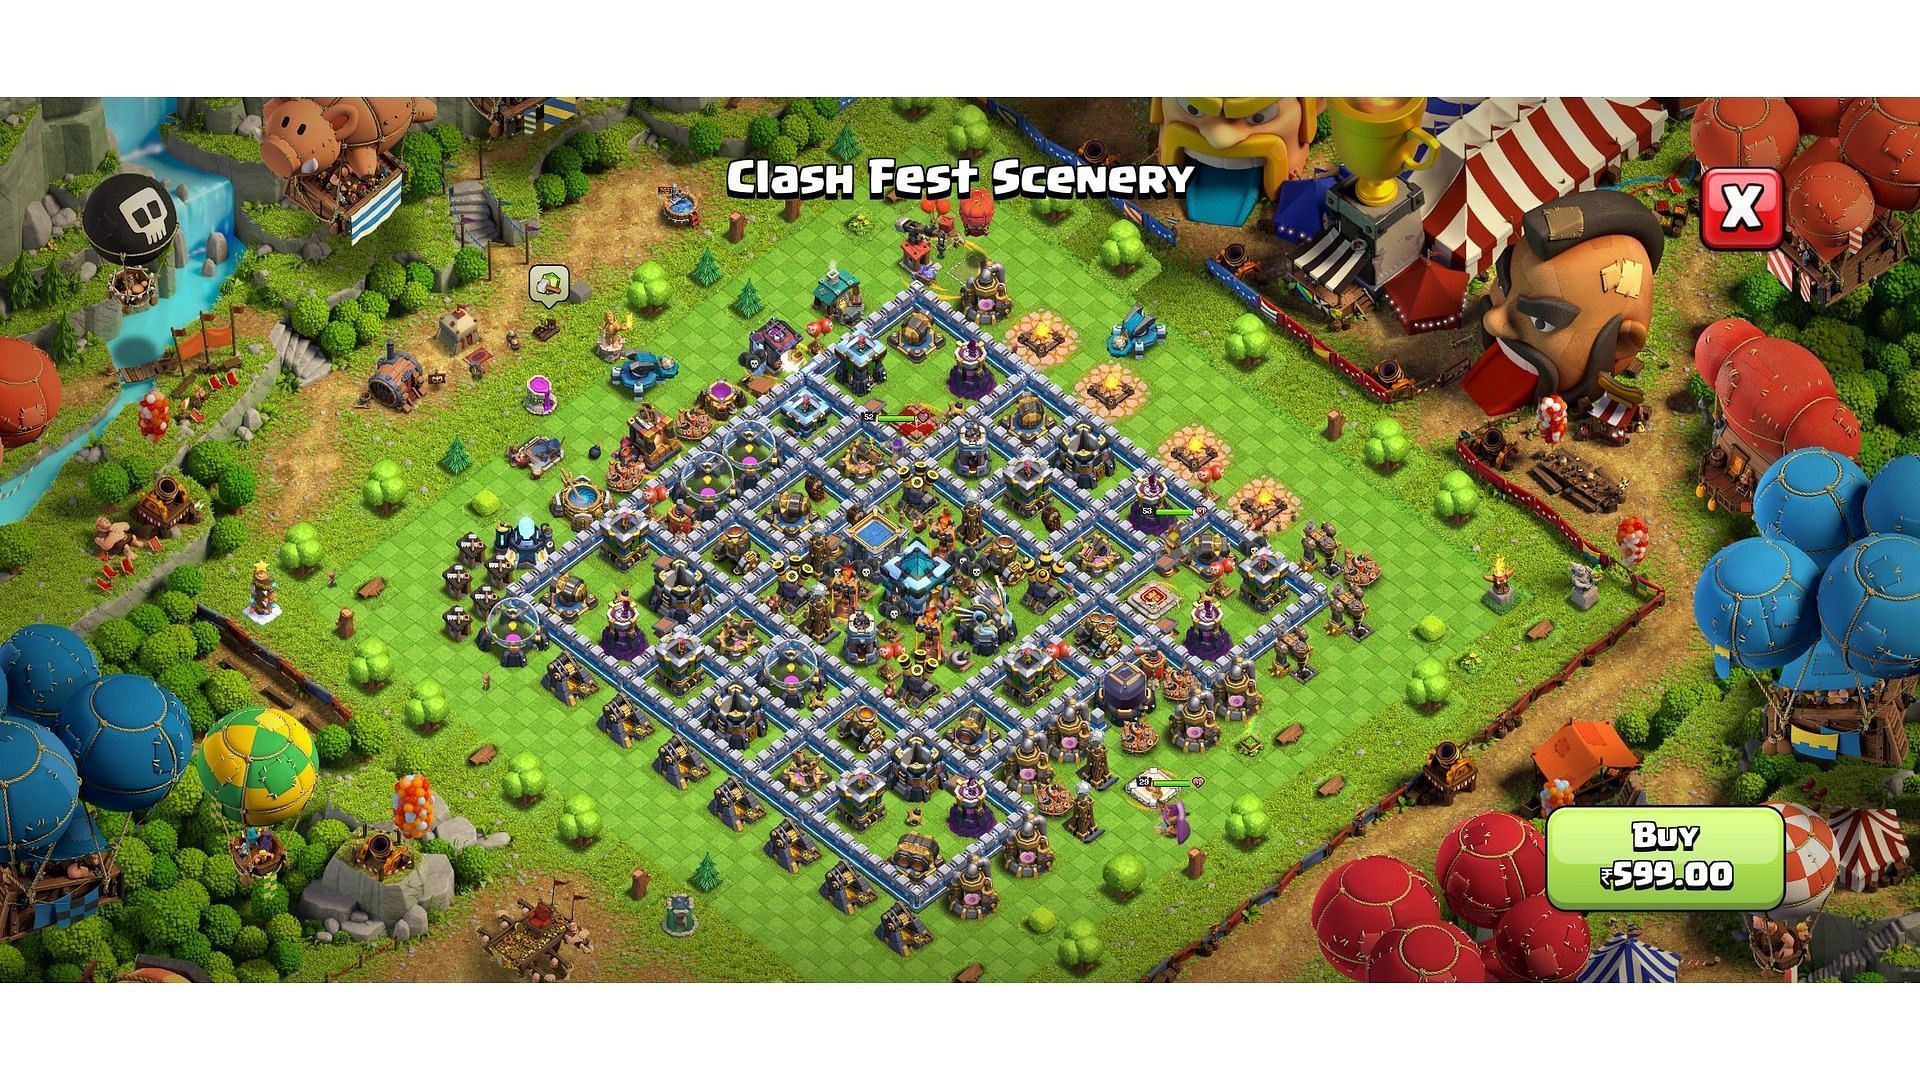 Clash Fest scenery (Image via Supercell)